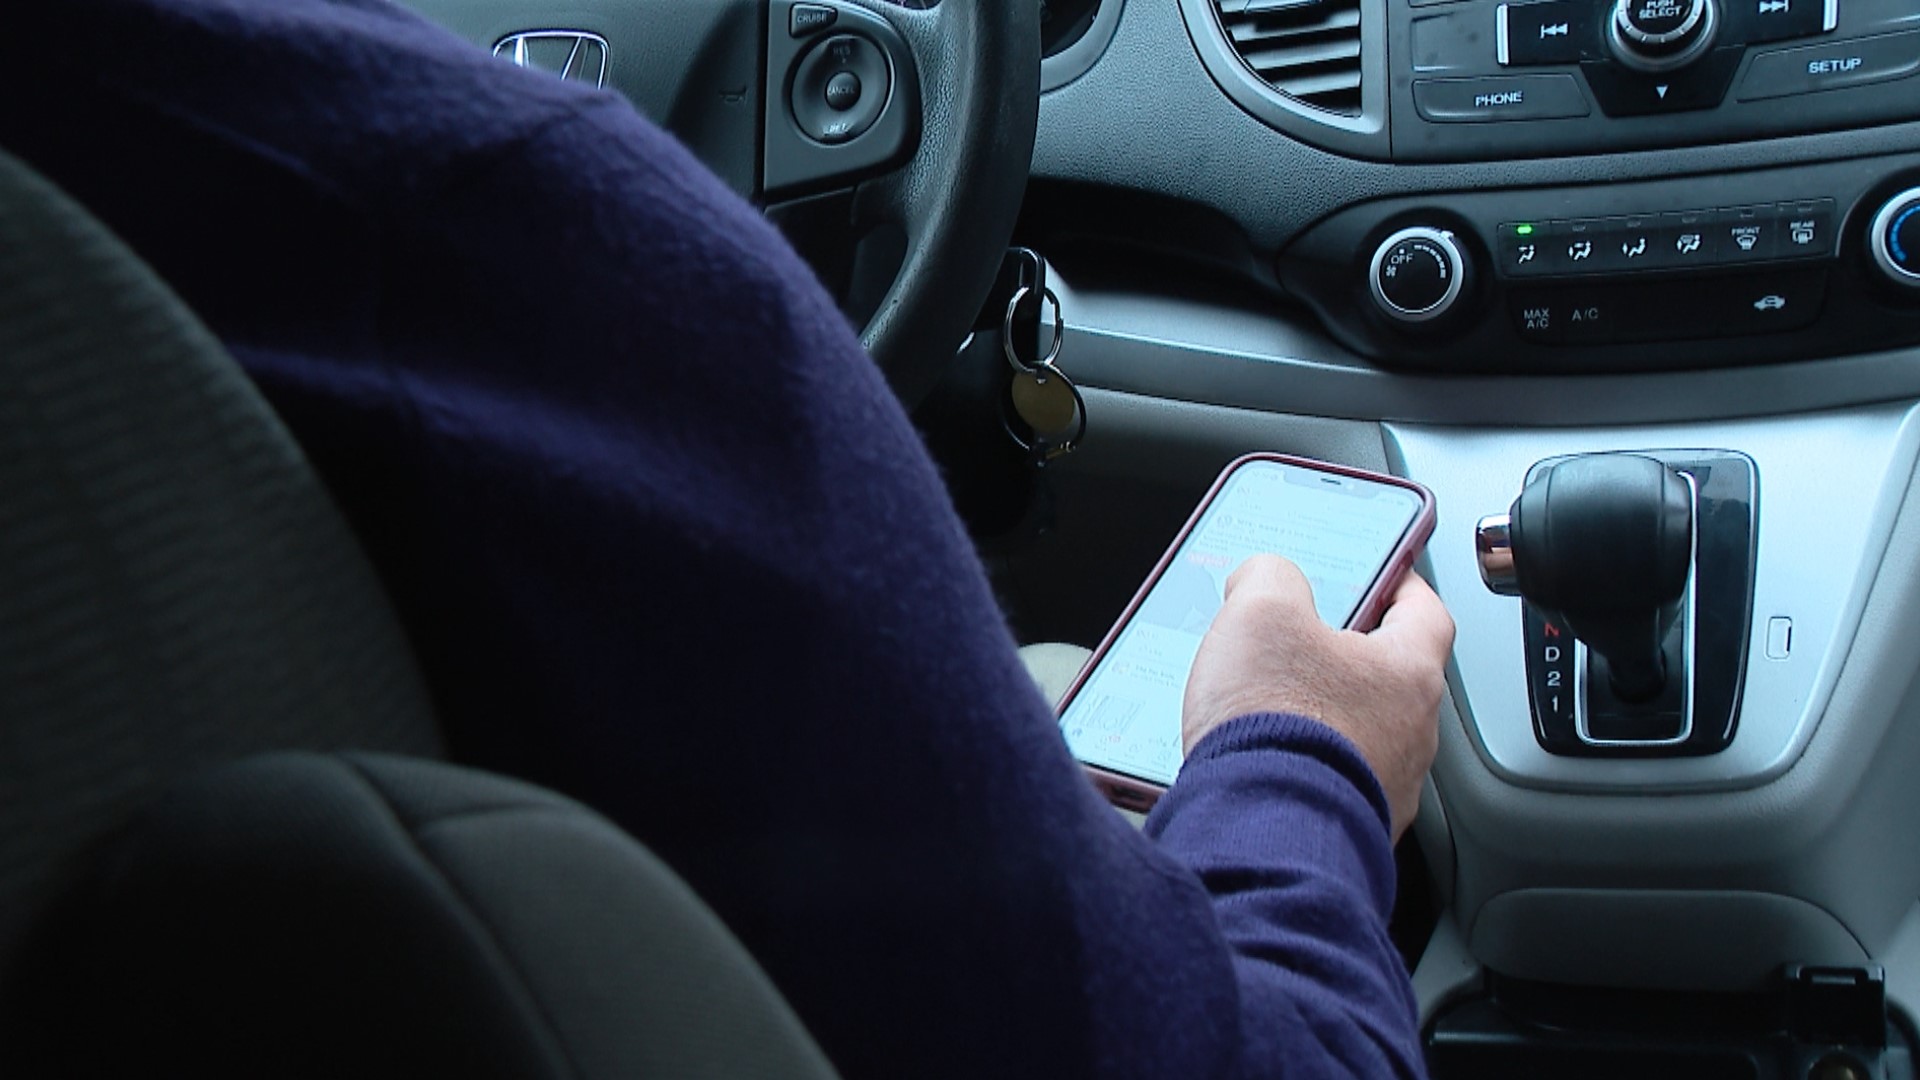 The legislation will allow people to be stopped by police solely for holding or using a cellphone while driving.